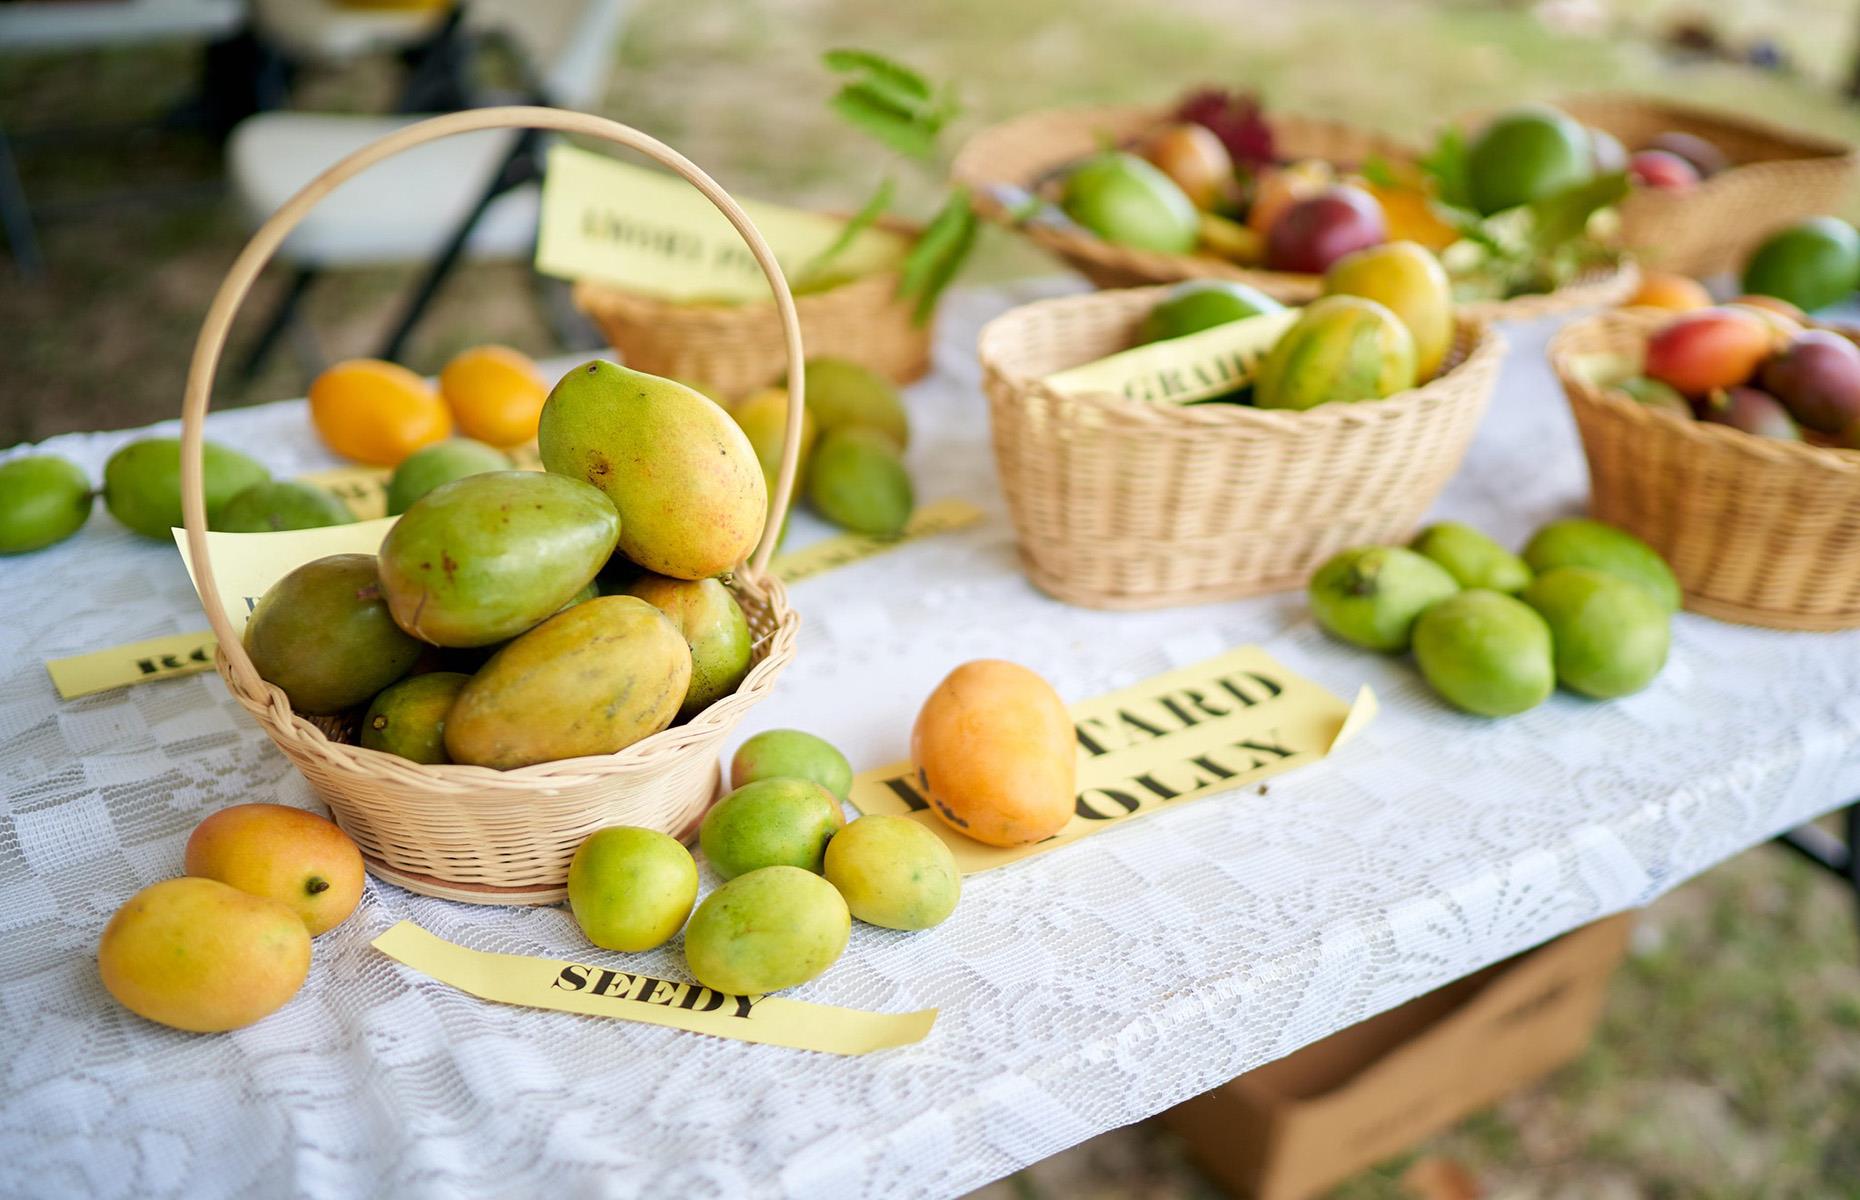 <p>Nevis is home to a whopping 44 varieties of mango, so it makes sense that every summer, the island hosts its very own <a href="https://nevismangofest.com/2023">Mango Festival</a>: a celebration of its most famous and beloved fruit. Usually held at the end of June or start of July, the party lasts from Friday right through to Sunday, and involves everything from mango massages, treasure hunts, food tastings and bar crawls to cookery demonstrations and mixology competitions – all at some of Nevis’ most beautiful locations.</p>